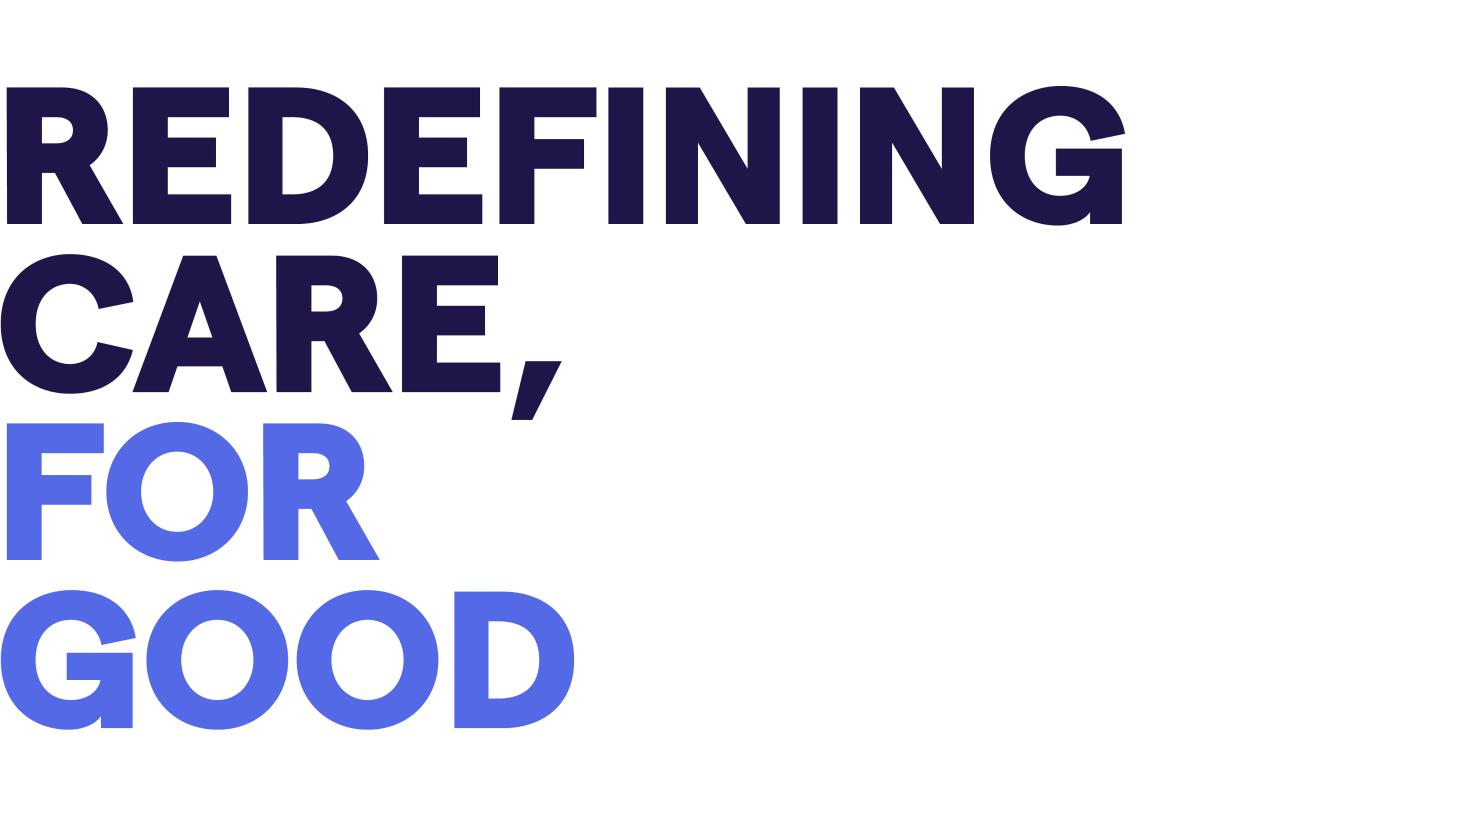 Redefining care, for good.